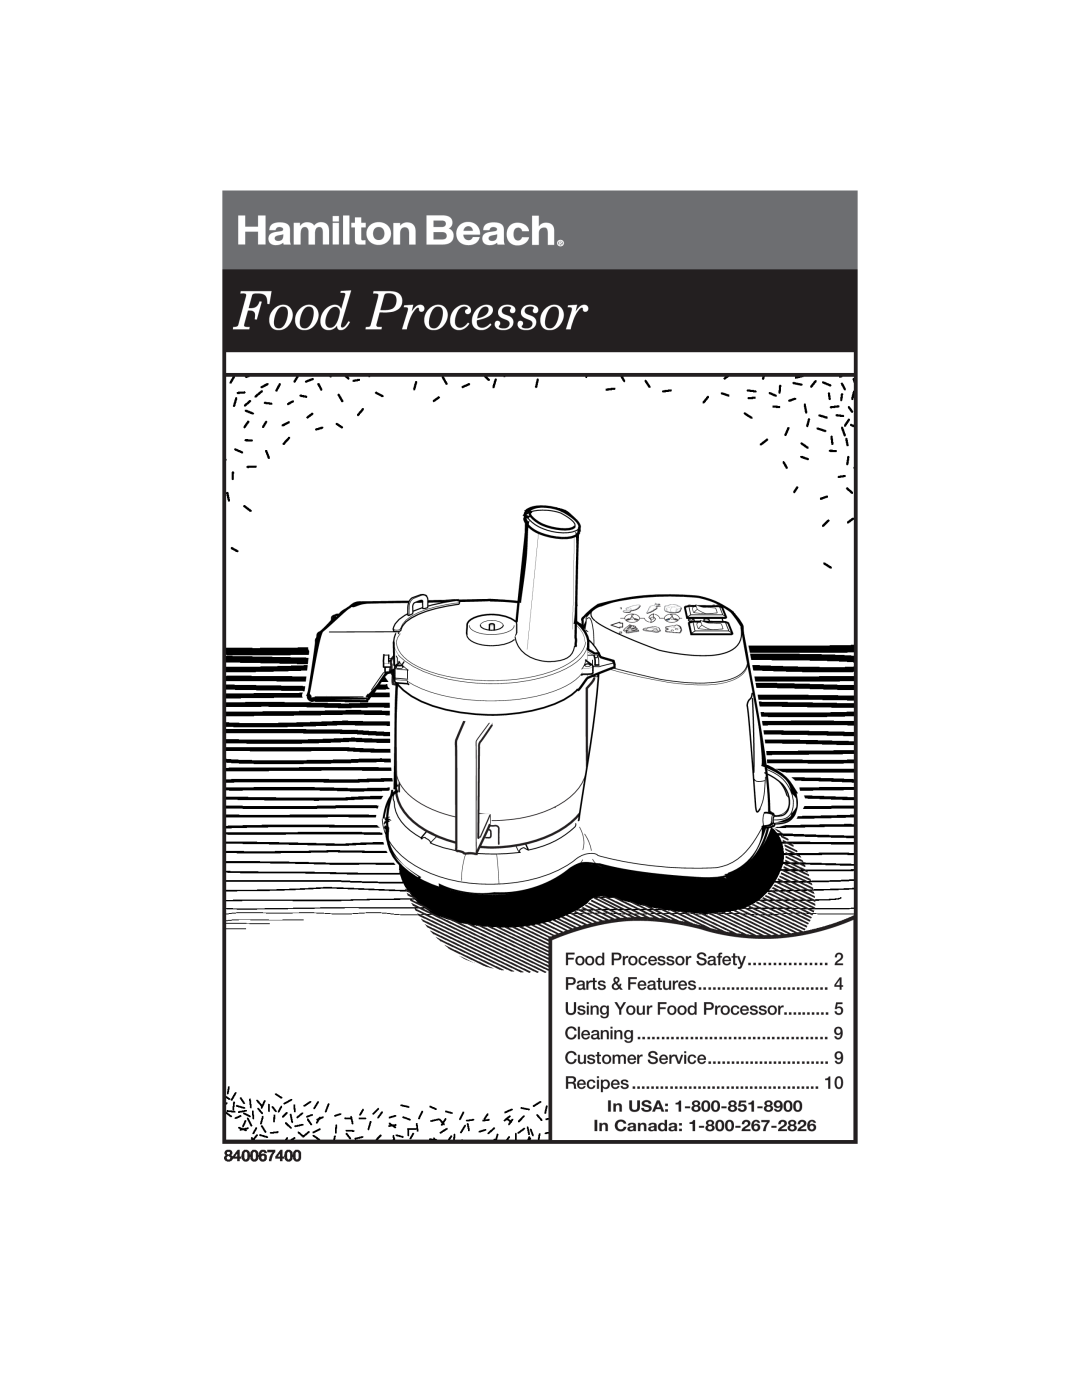 Hamilton Beach 840067400 manual Food Processor Safety, Using Your Food Processor, In USA, In Canada 